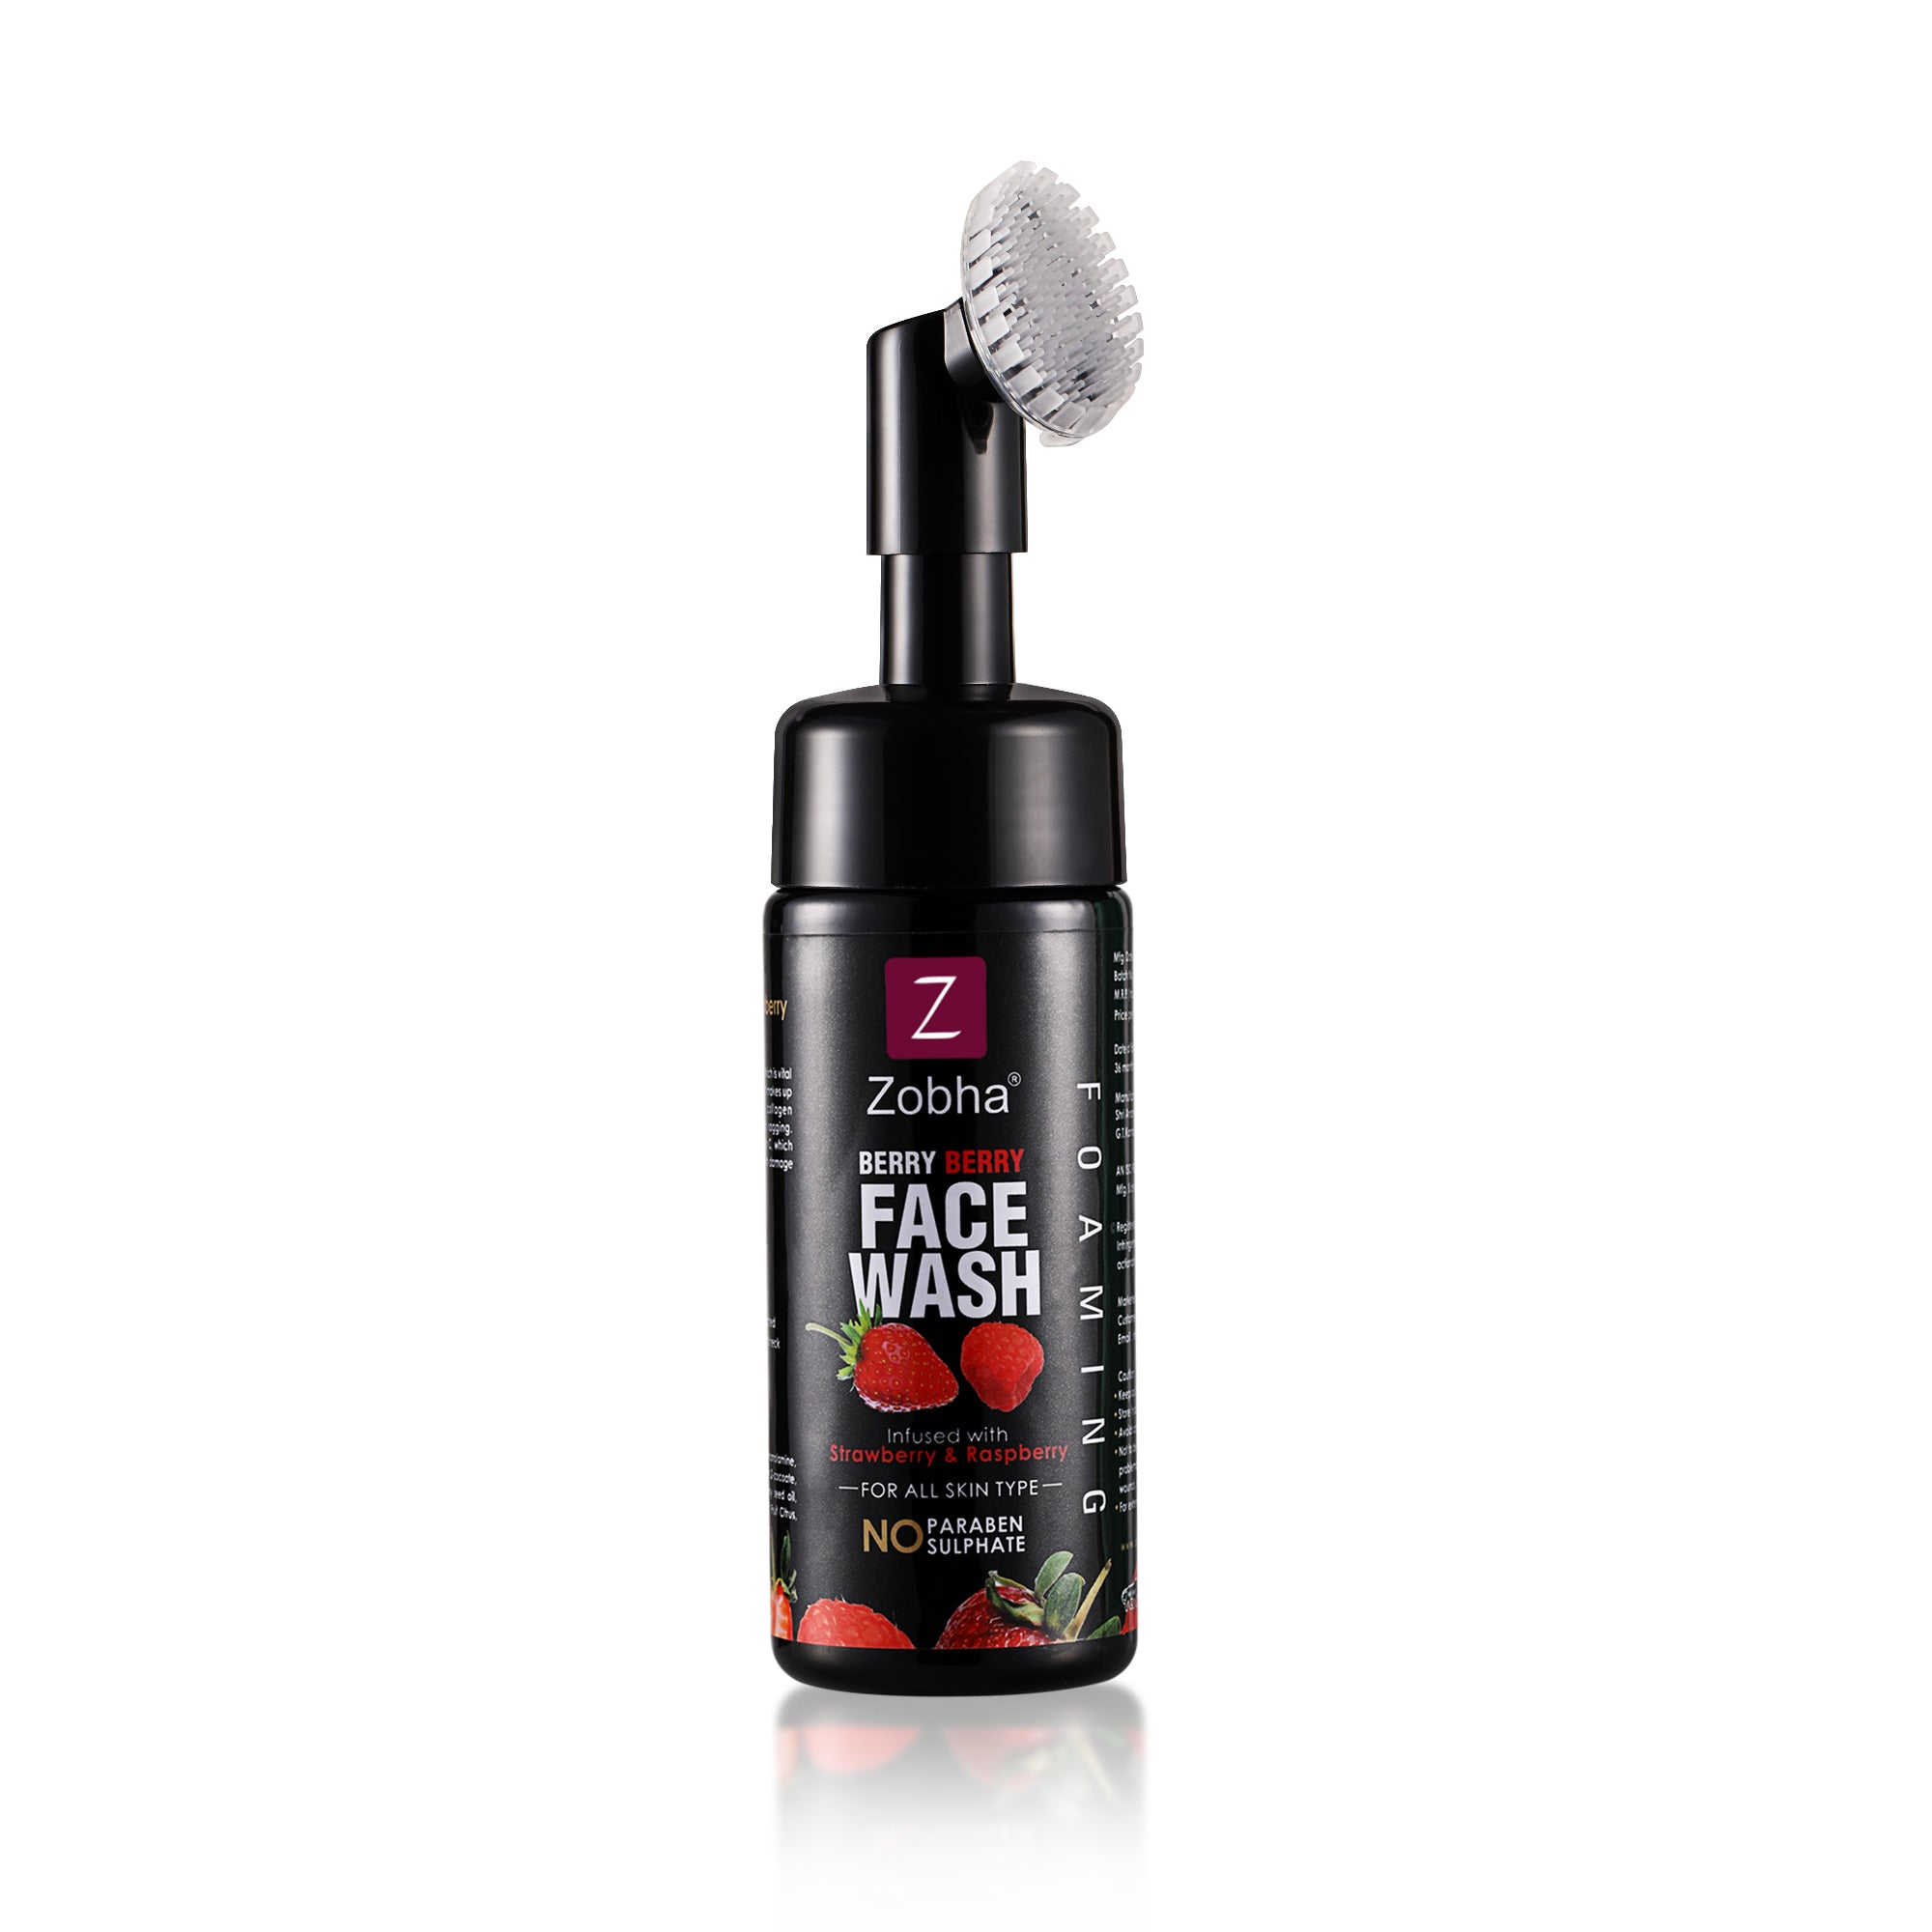 Berry Berry Foaming Face wash